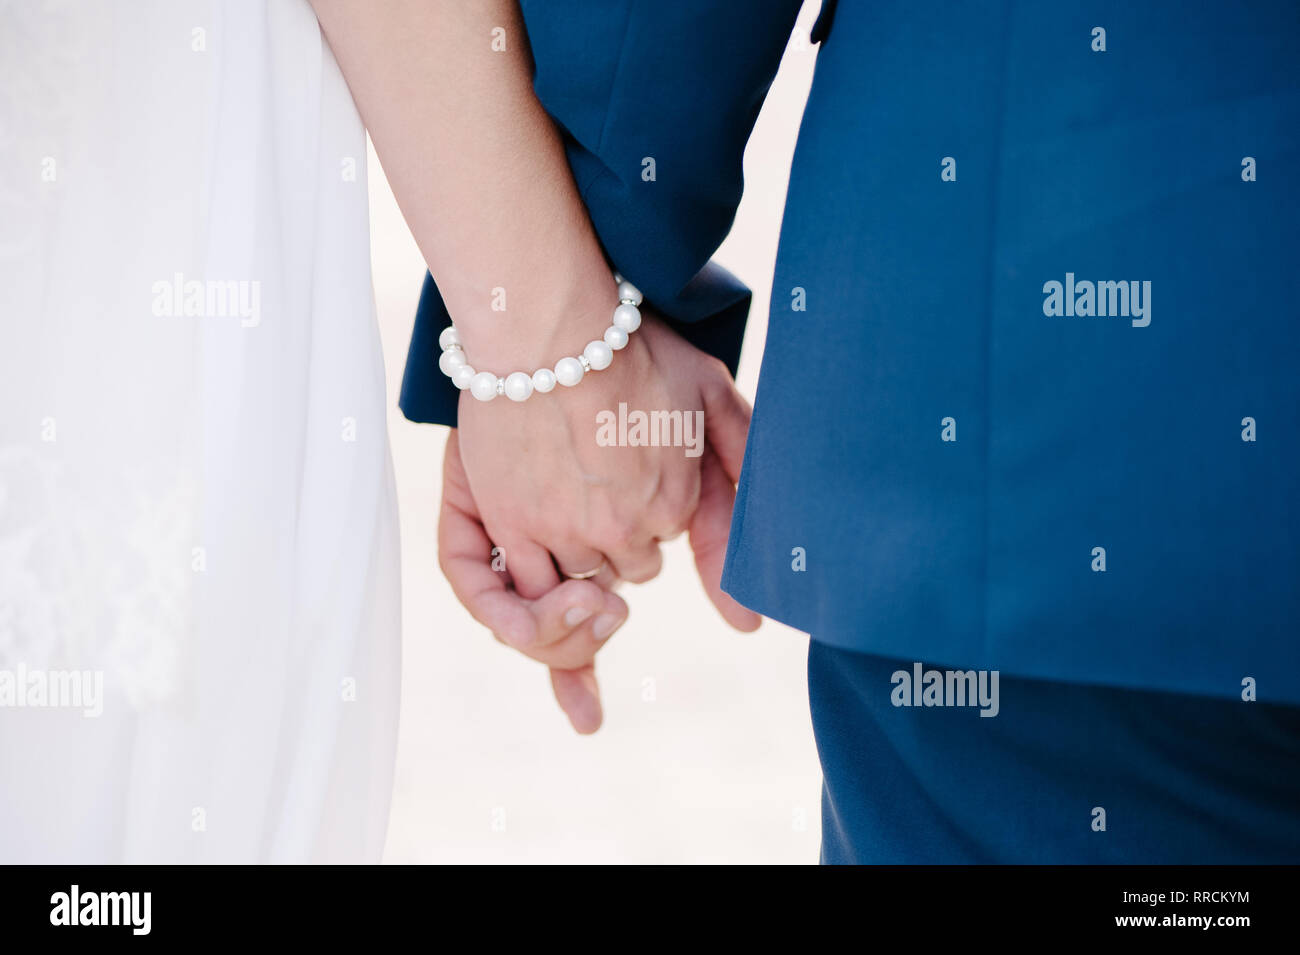 Newlyweds staying together and holding arm in arm Stock Photo